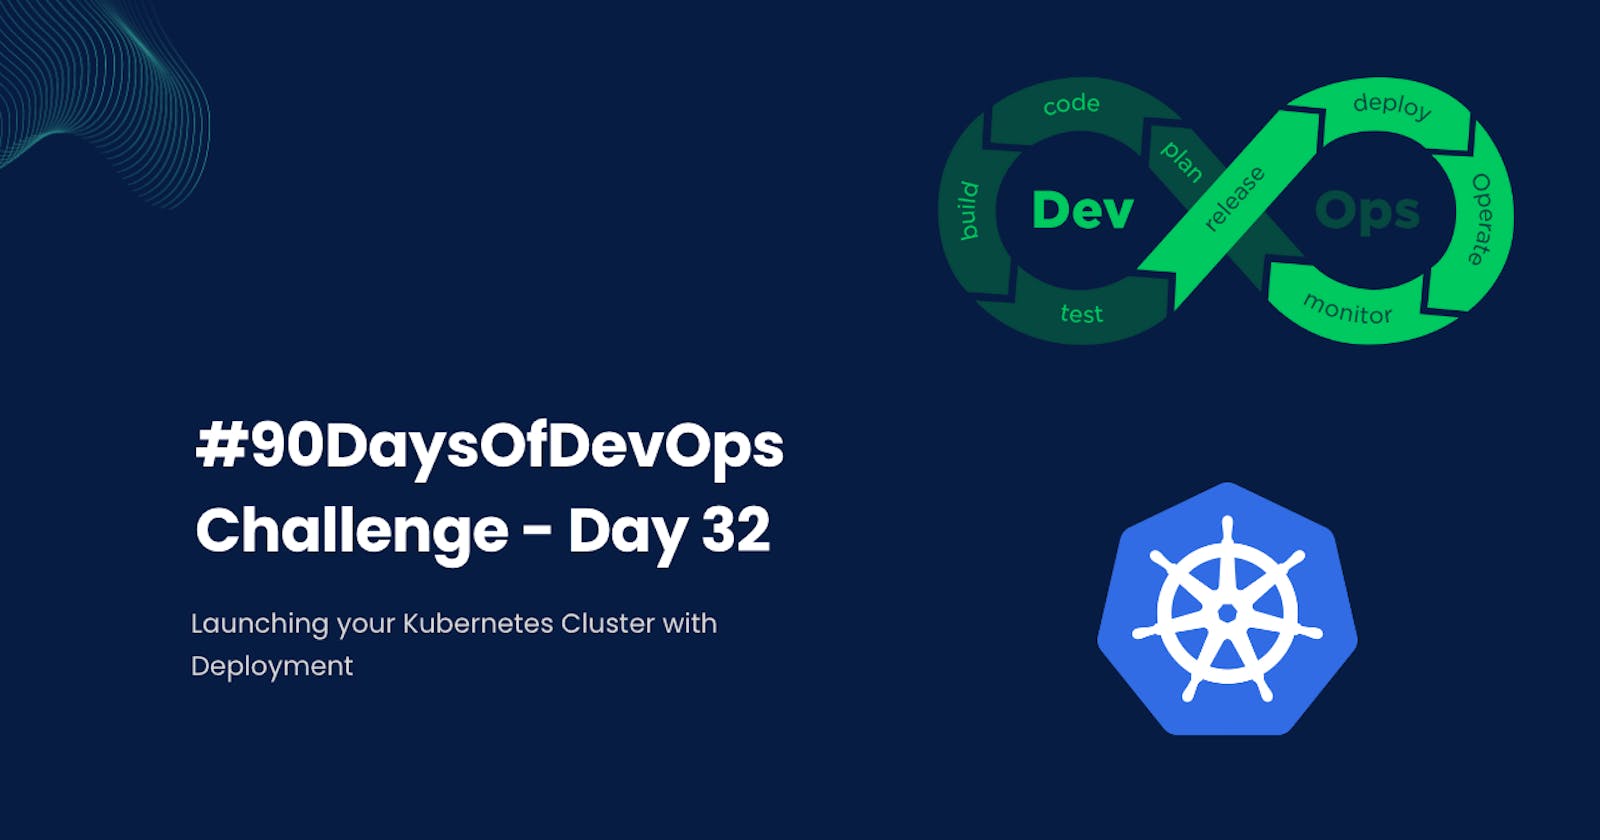 #90DaysOfDevOps Challenge - Day 32 - Launching your Kubernetes Cluster with Deployment